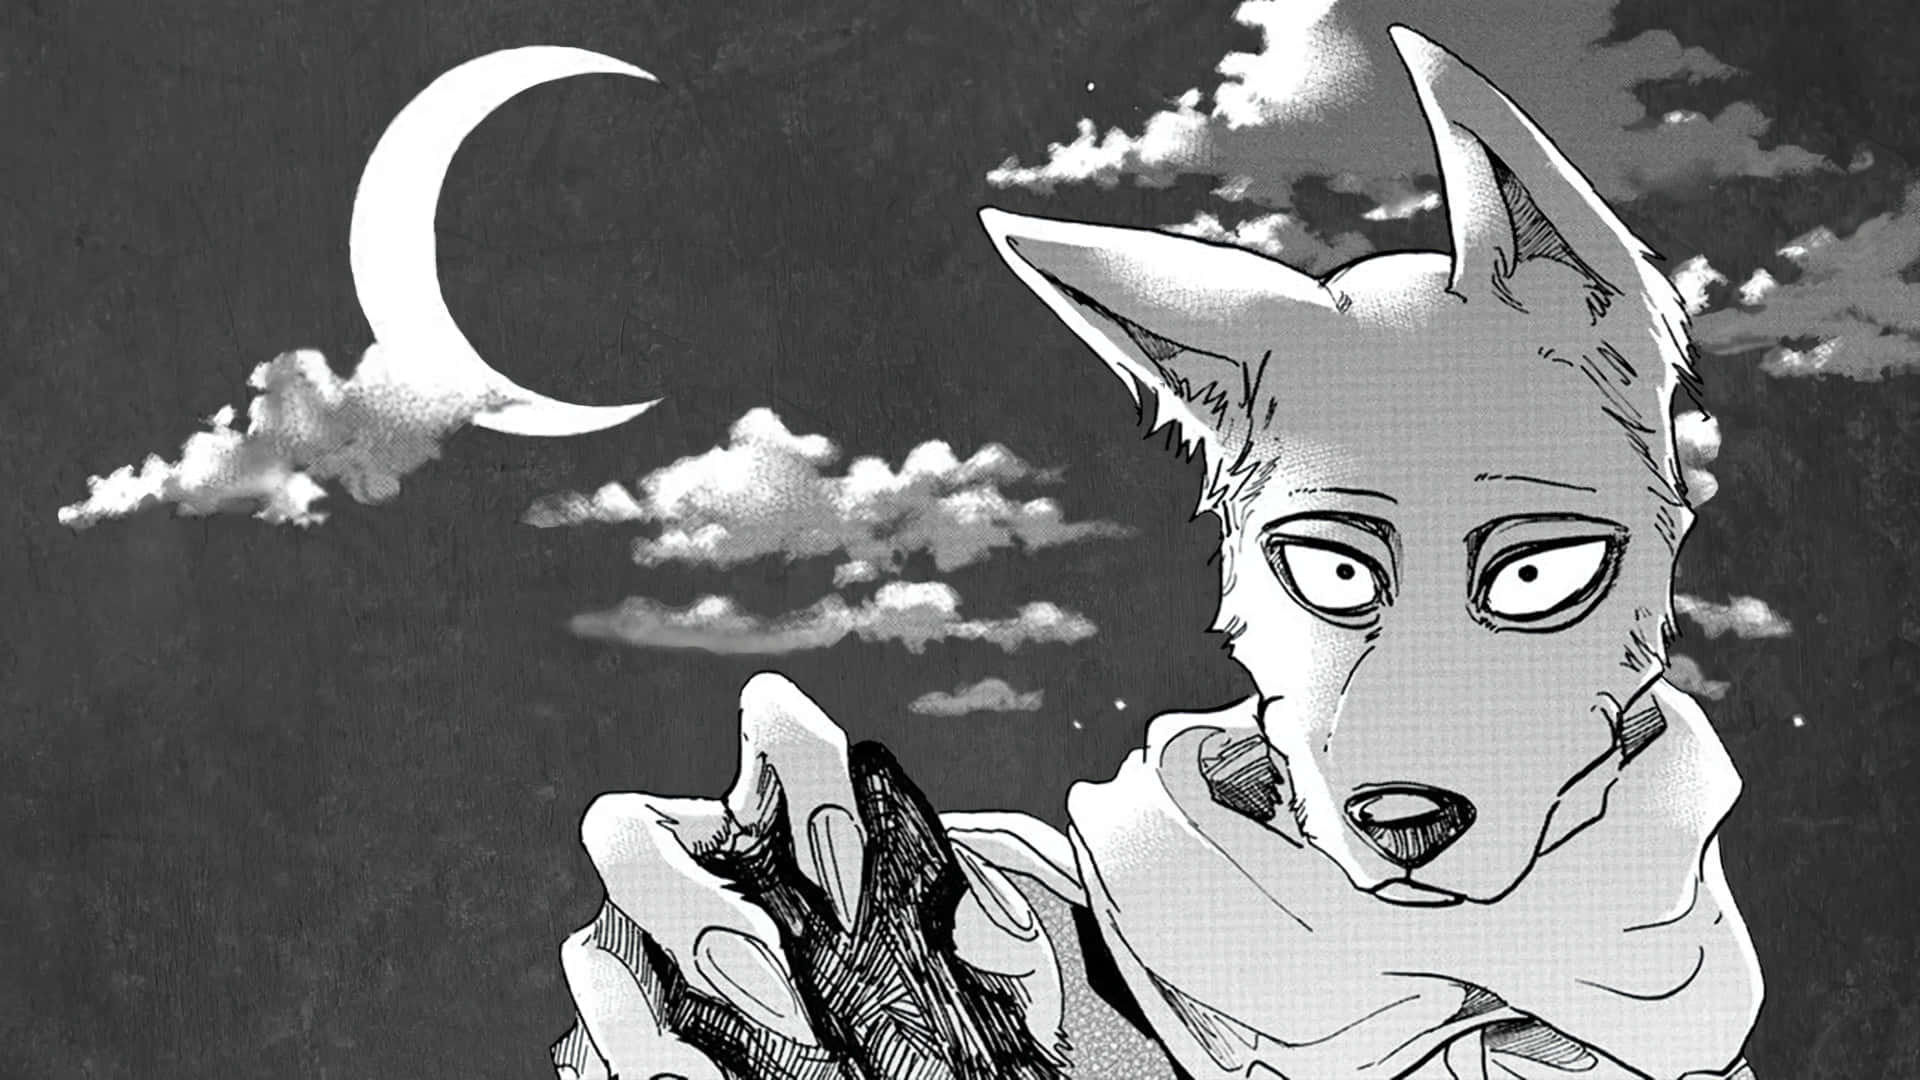 Two animals from different species find friendship in Beastars